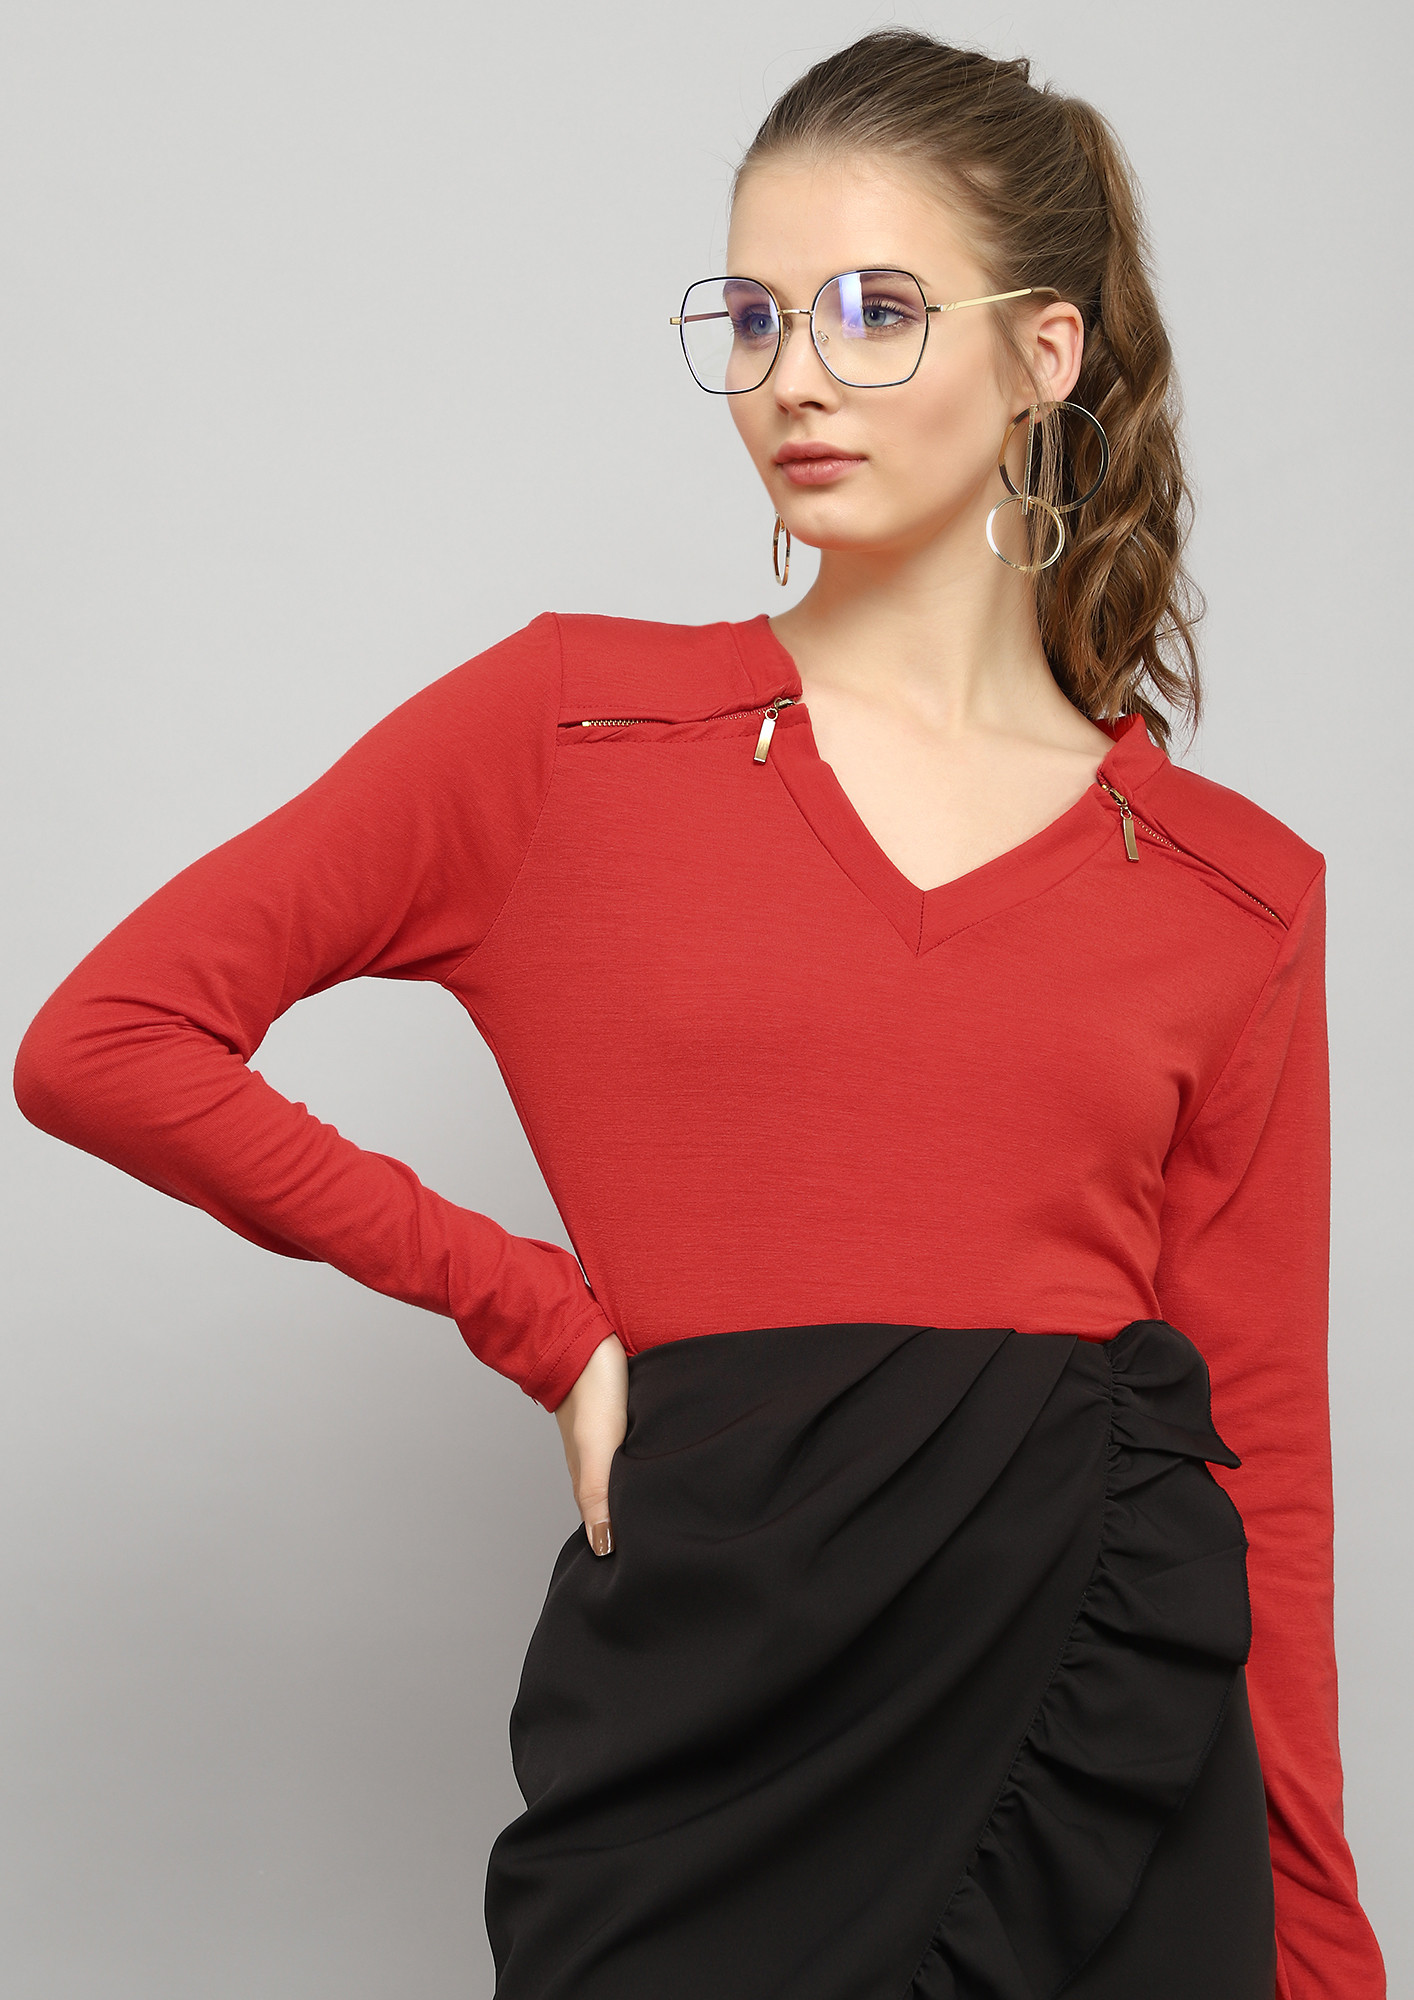 LIFE AHEAD OF US RED RIBBED TOP